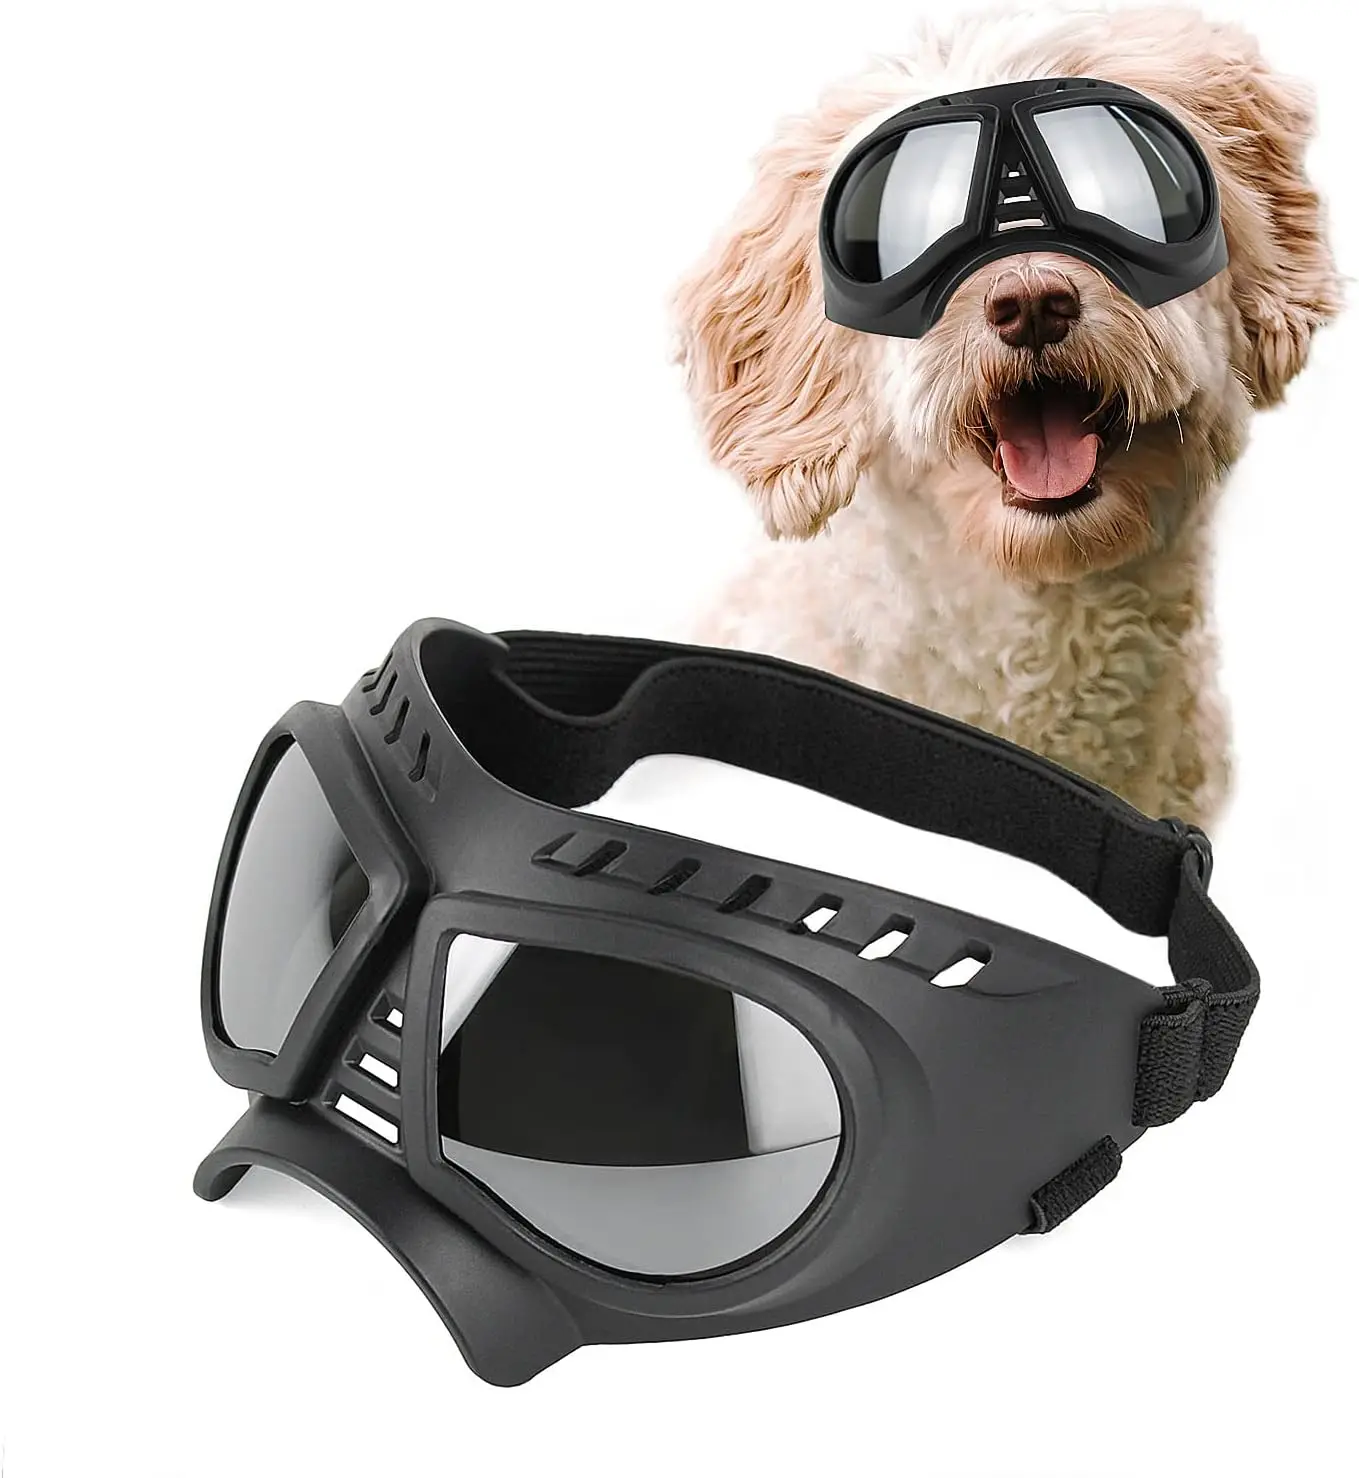 

ATUBAN Dog Goggles,Dog Glasses for Puppy Breed Dog,Windproof,Waterproof and Durable,UV Sunglasses with Adjustable Straps,Silver